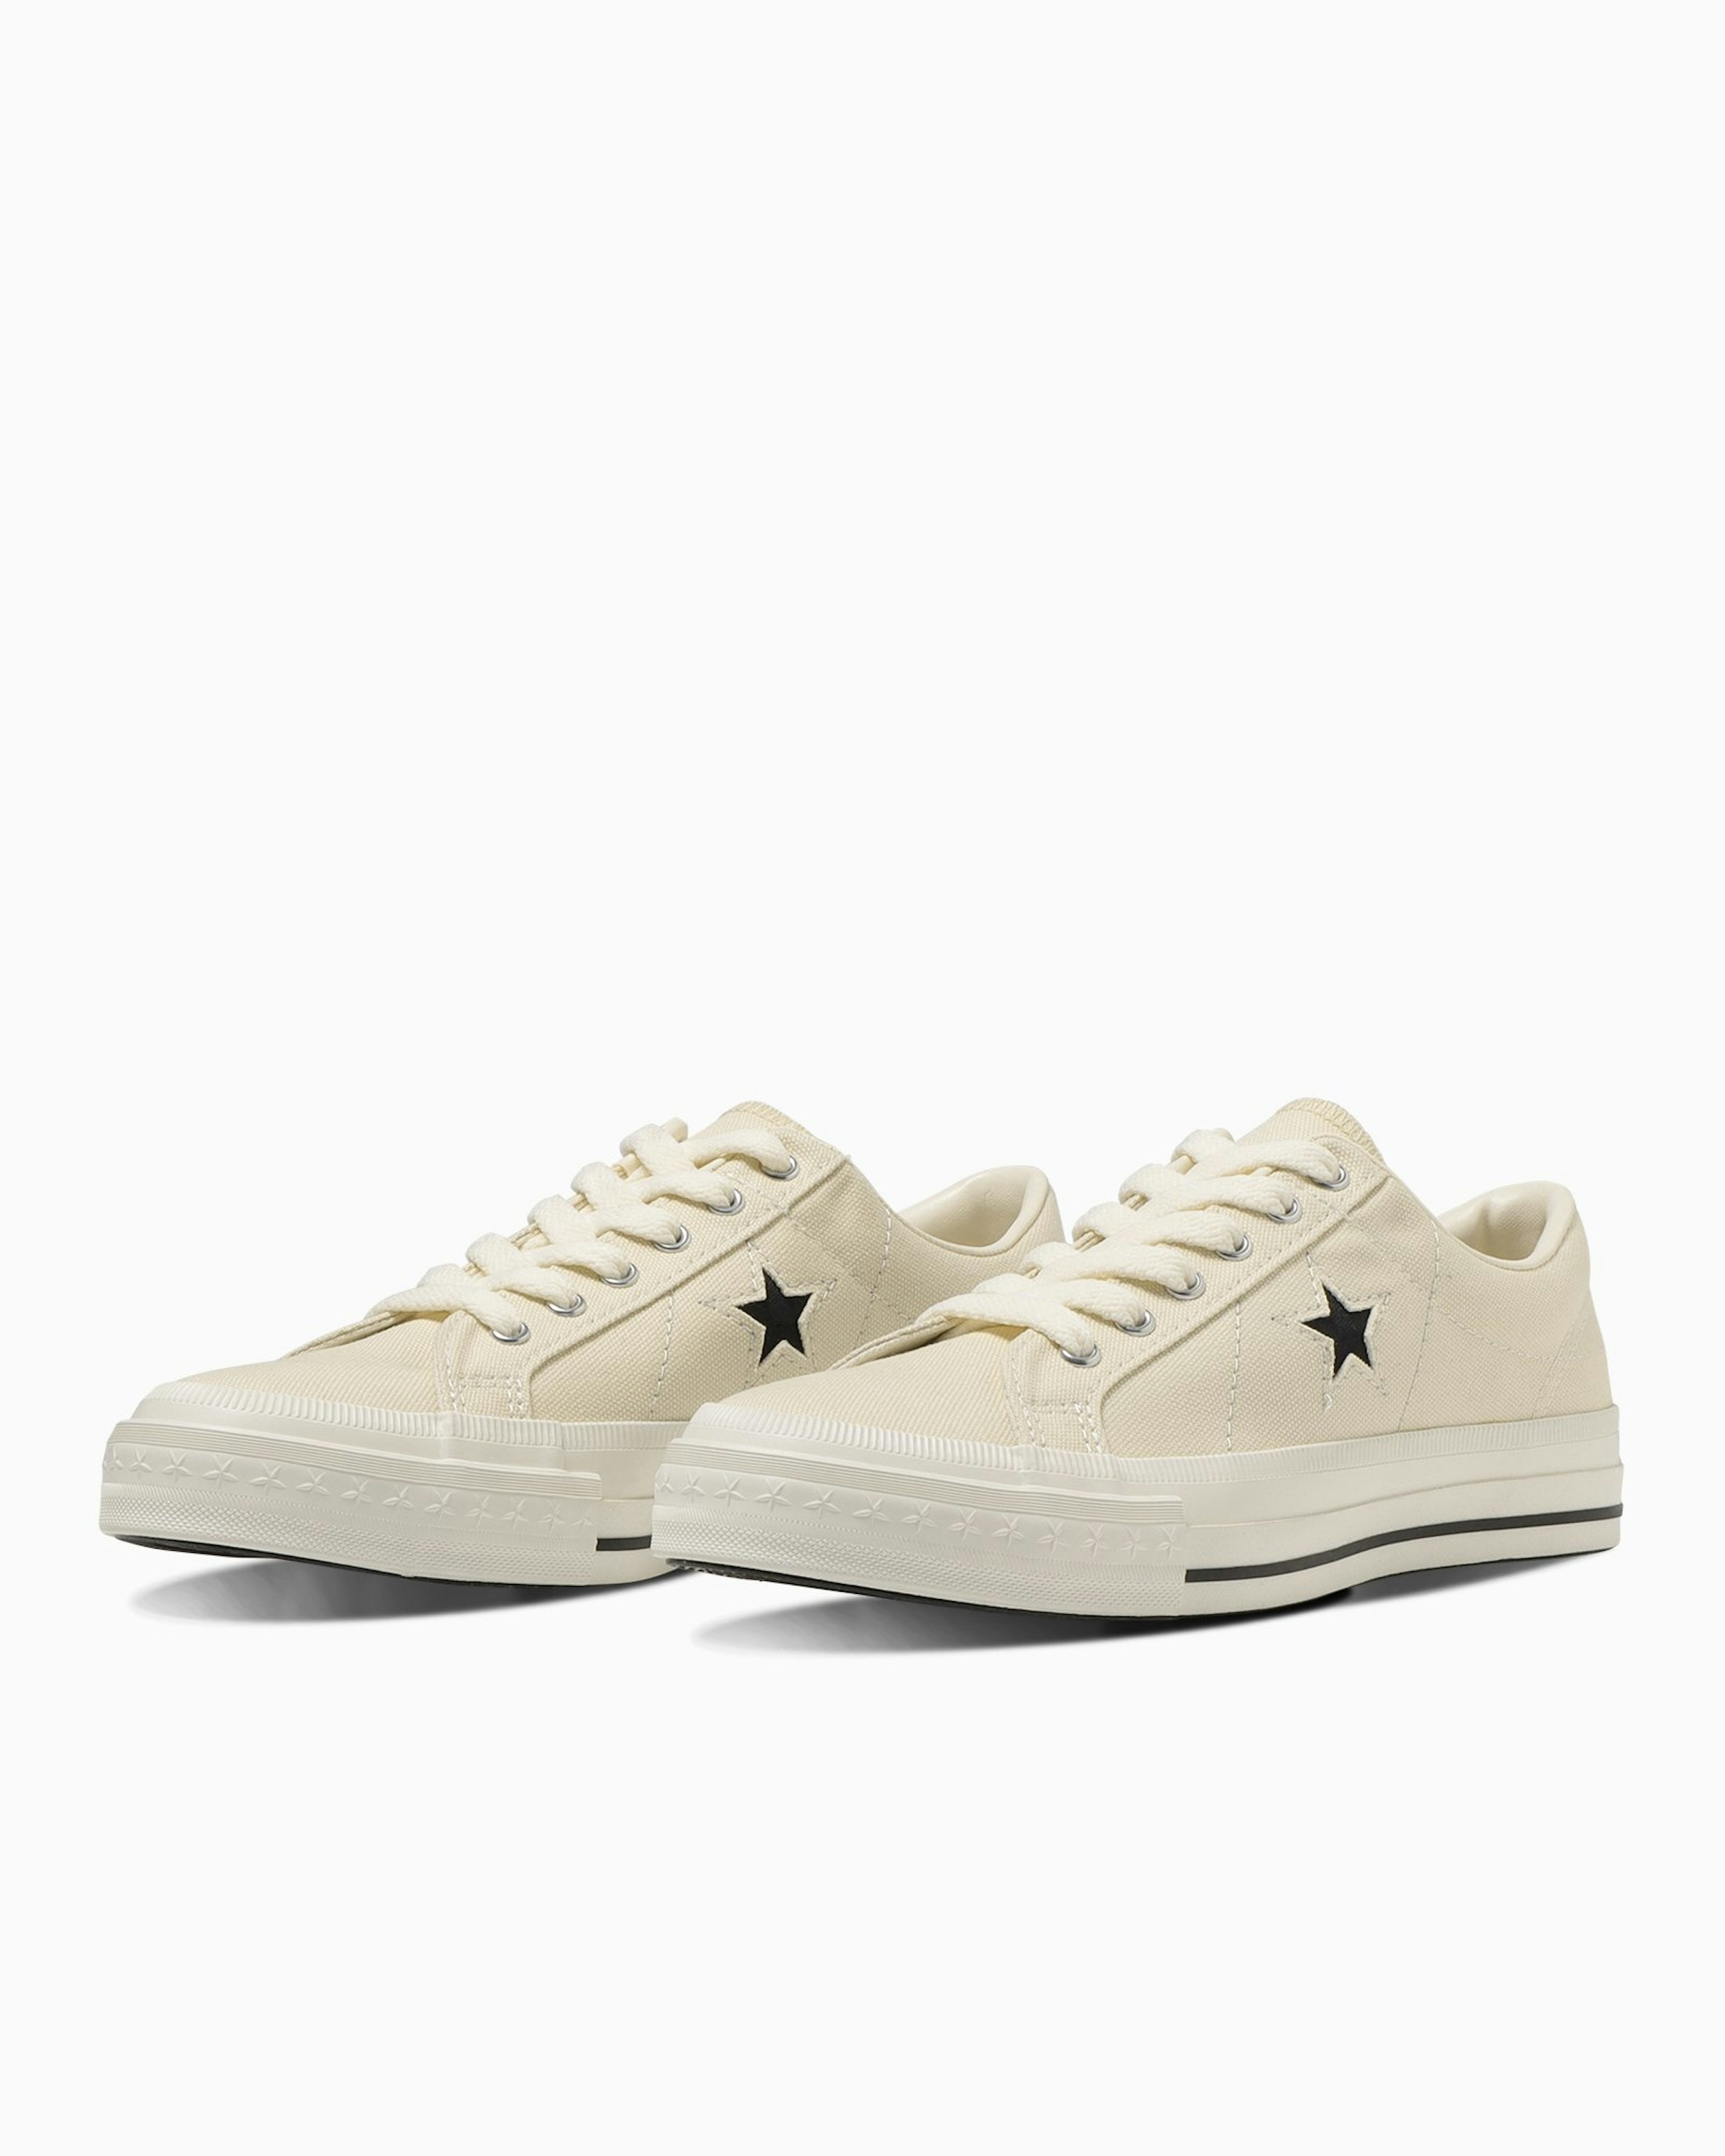 The Japan-made 'ONE STAR J VTG CANVAS' revived a fascinating canvas design from the 1990s from the limited 'TimeLine' line. The design faithfully recreates the original 1990s details, including the star motif on the toe guard, the small star, and the angular feather pattern. 20,900 yen (tax included)